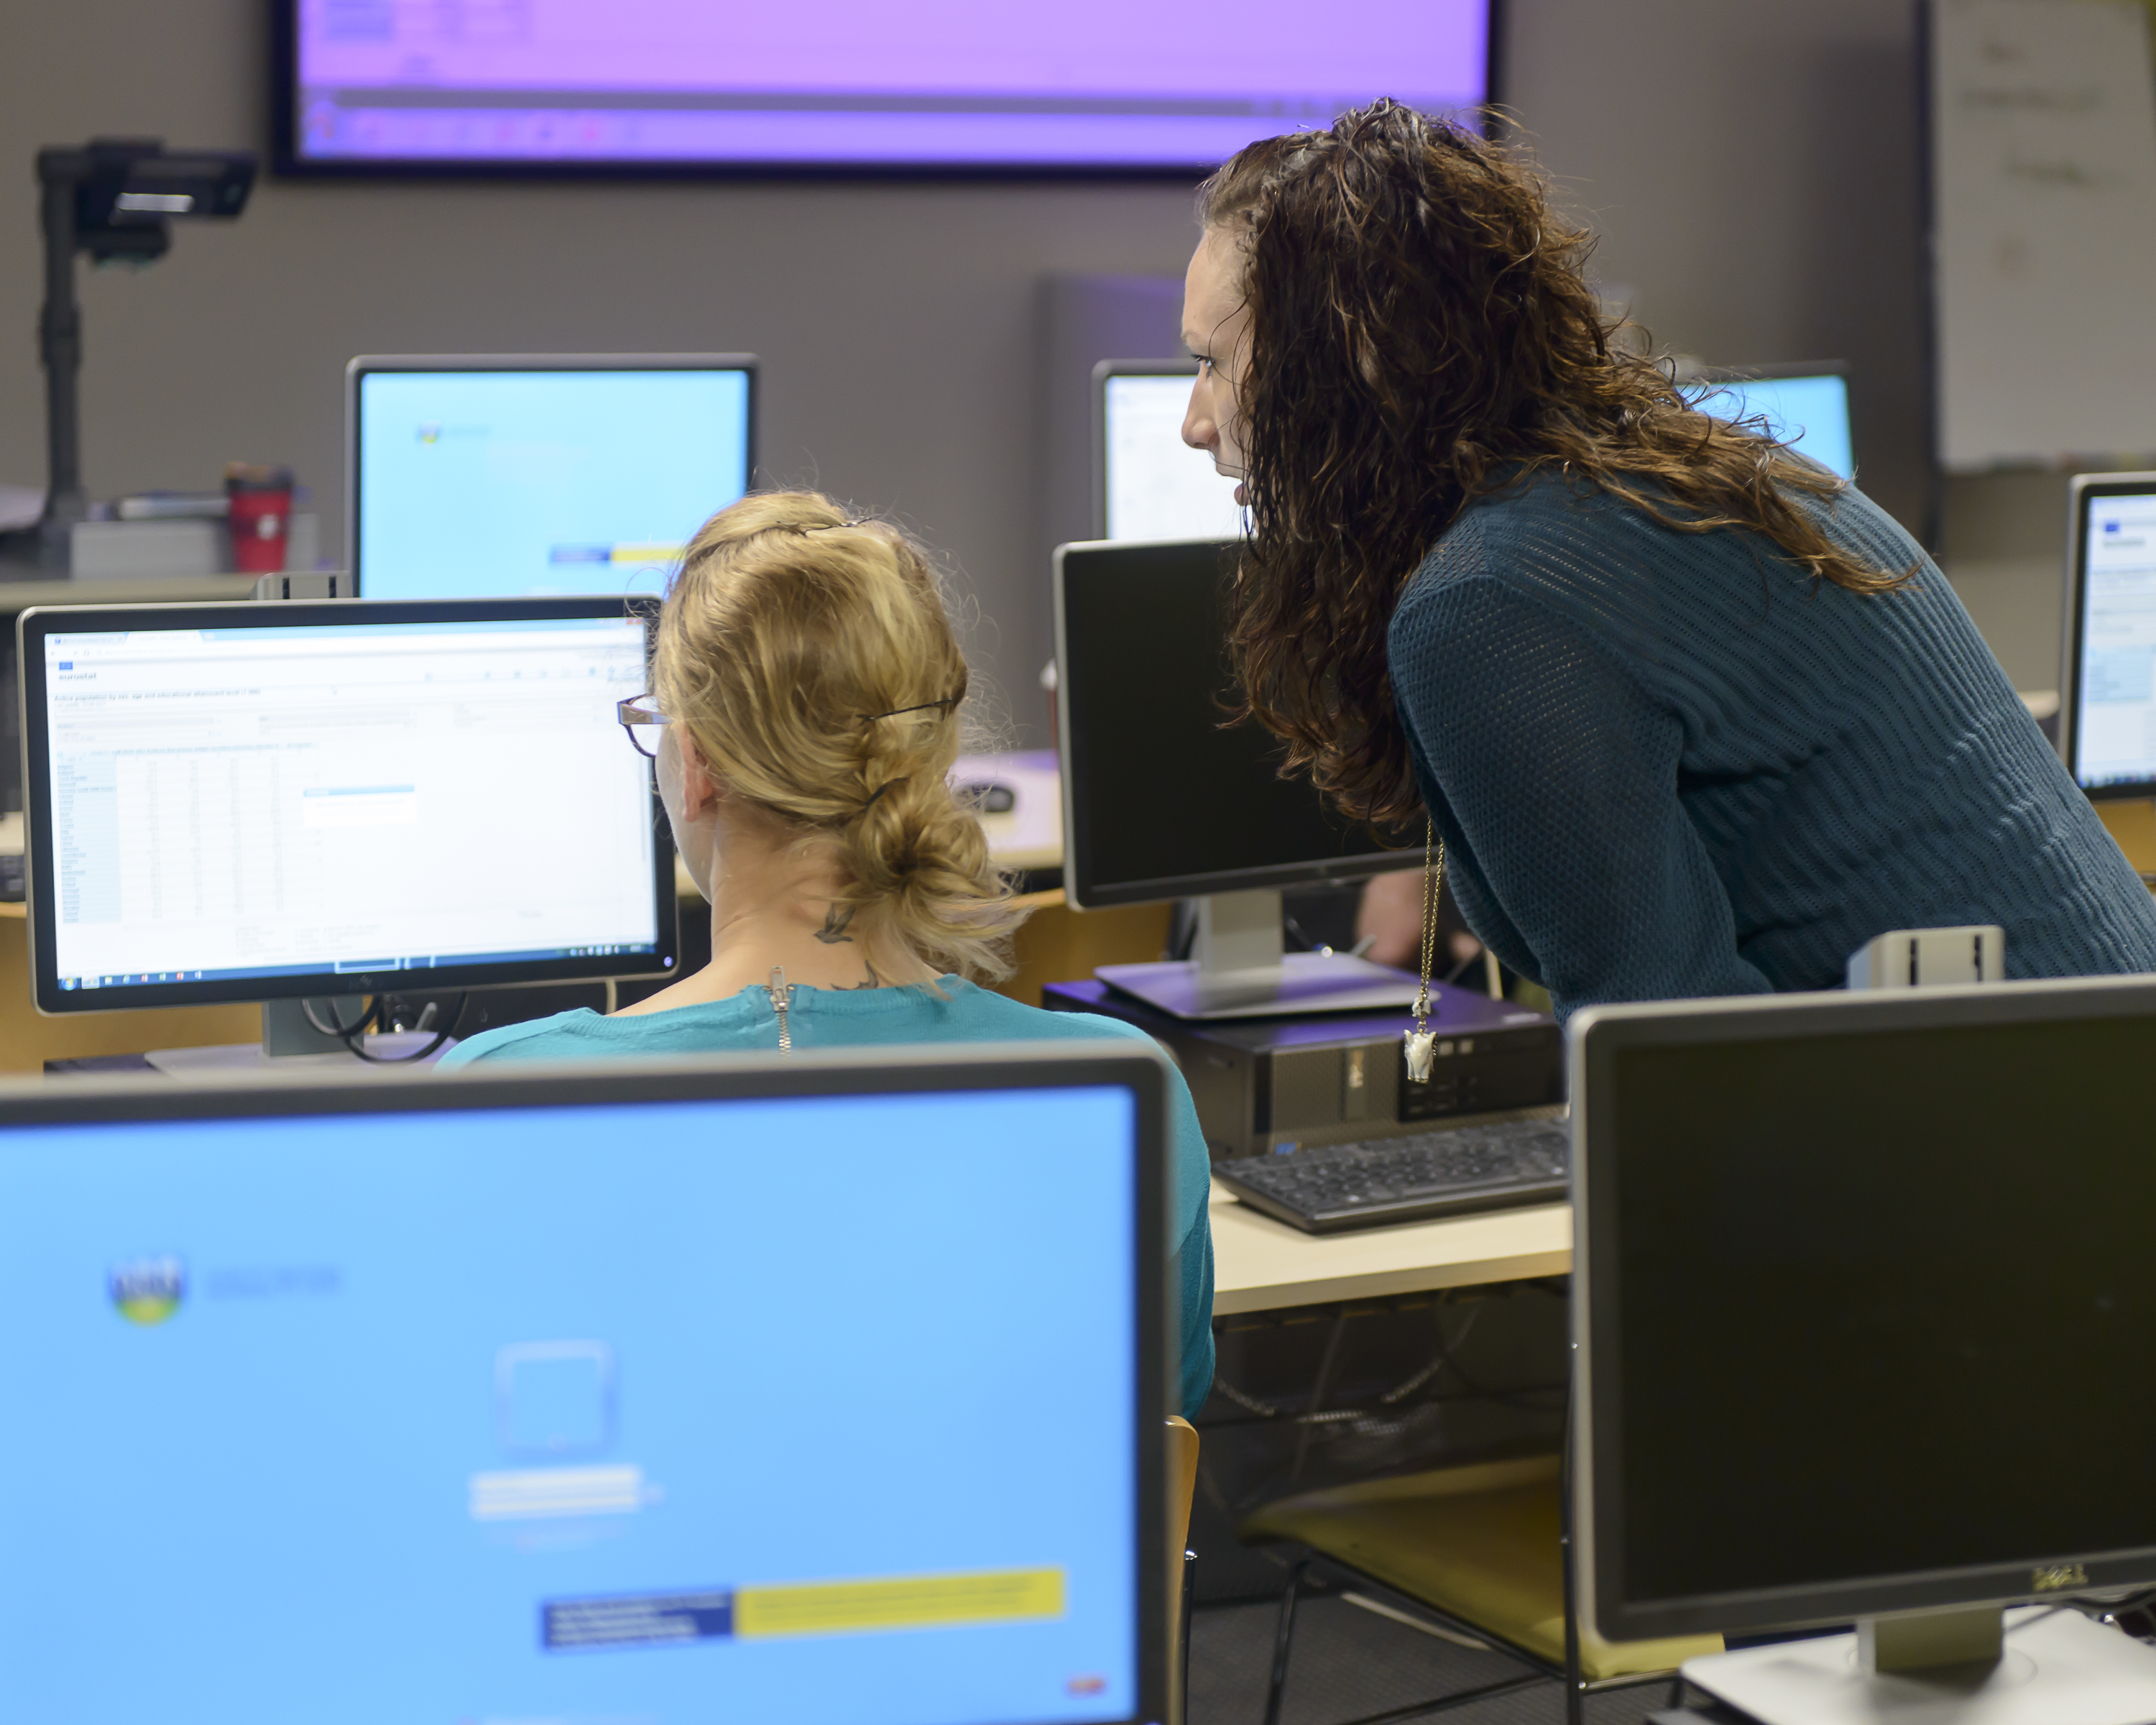 Photo of a student sitting at a computer screen with another person looking at the screen over her shoulder, presumably to help